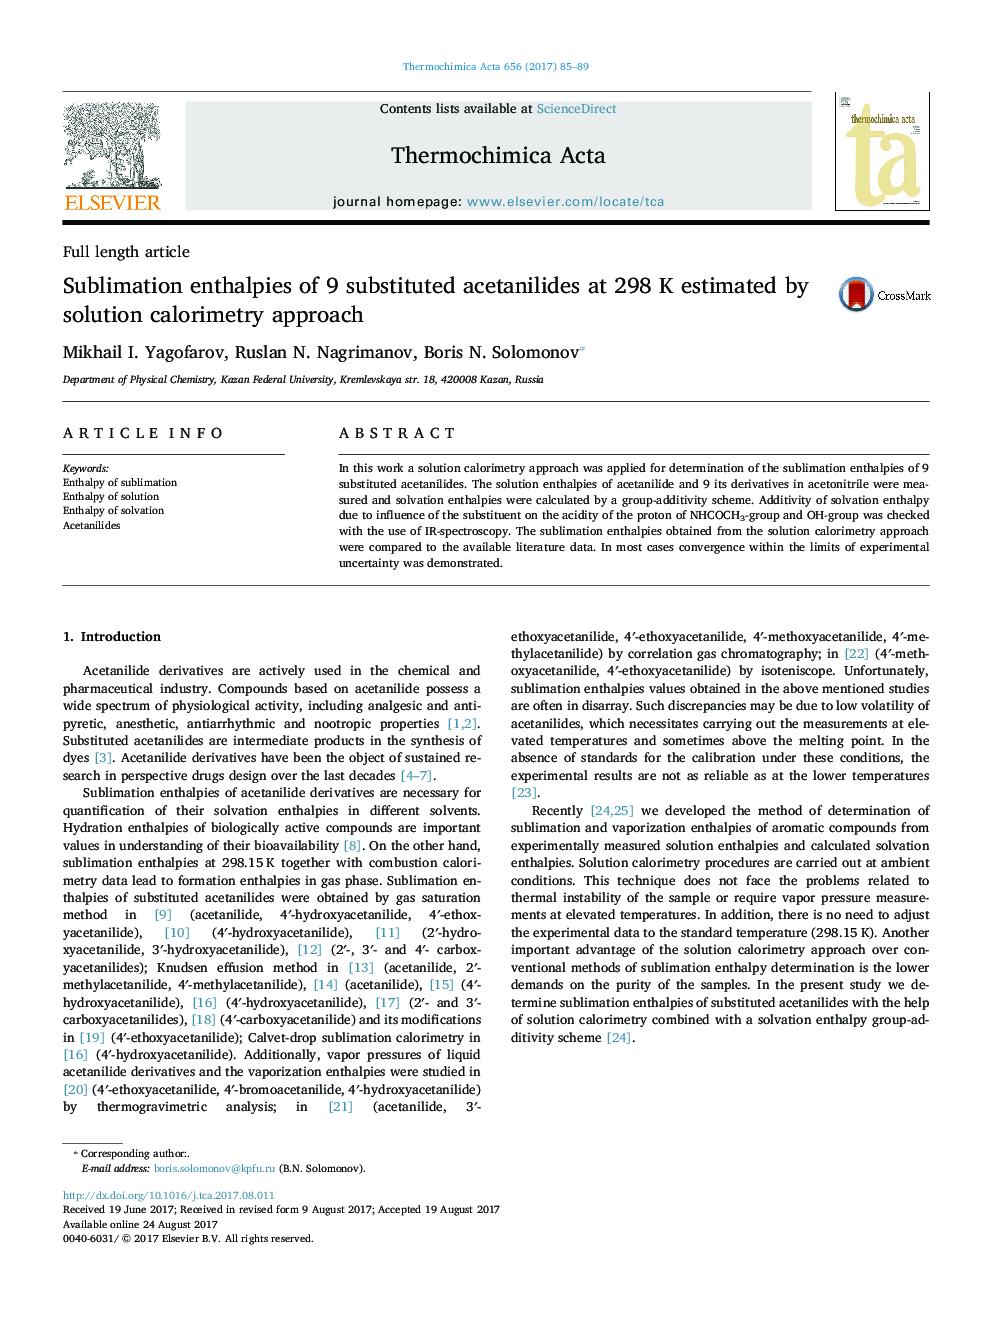 Sublimation enthalpies of 9 substituted acetanilides at 298 K estimated by solution calorimetry approach